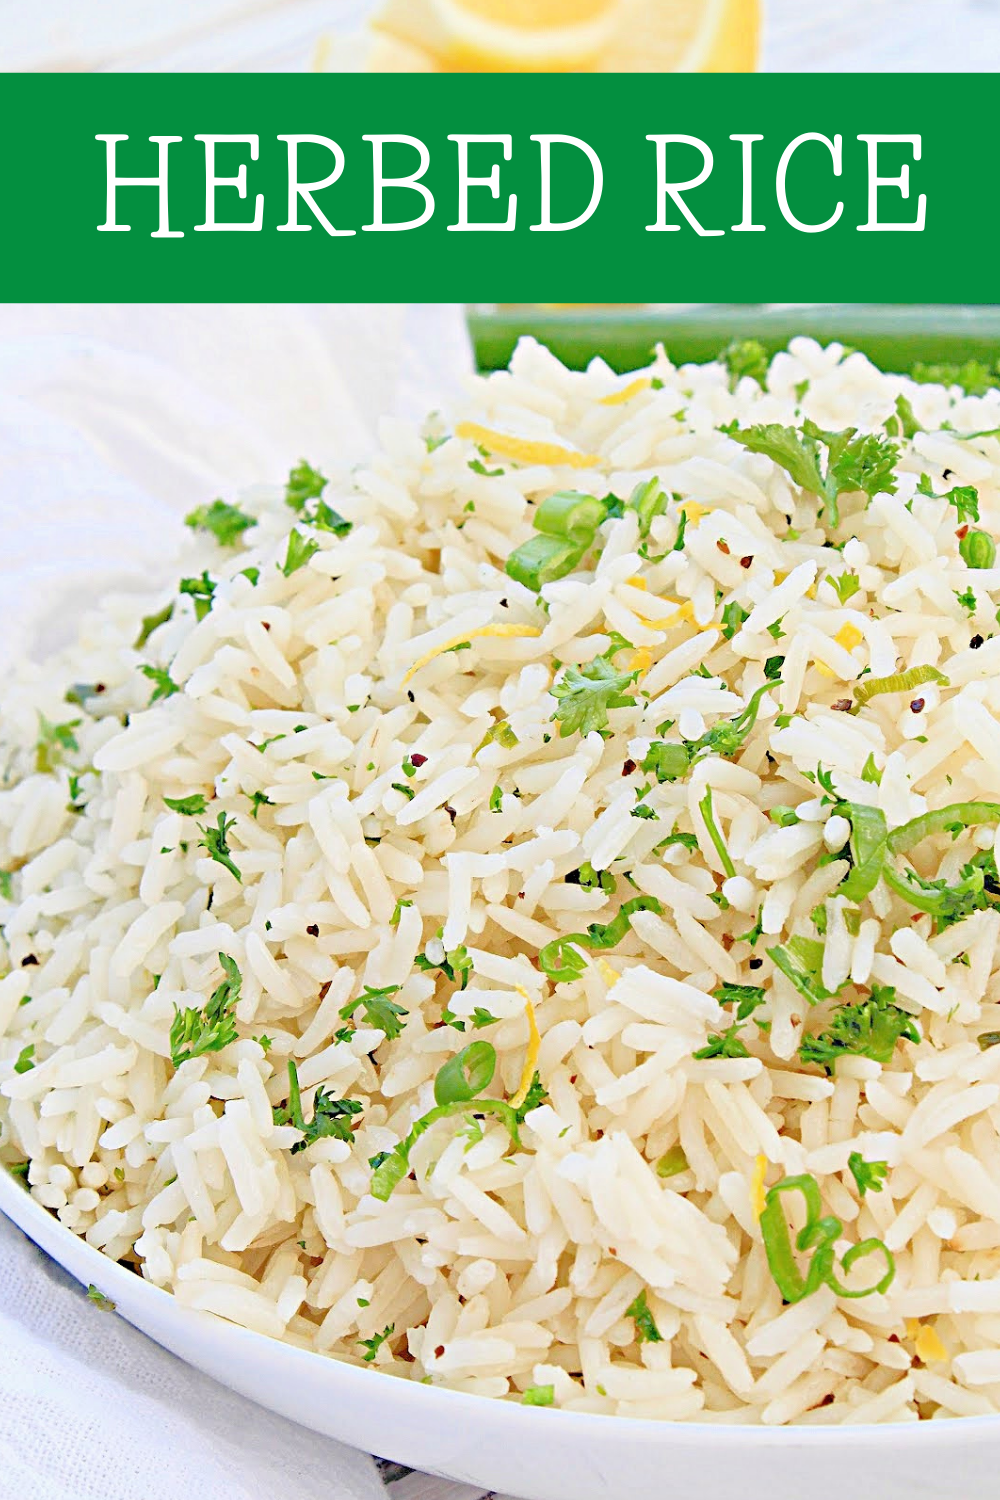 Herbed Rice ~ Fluffy white rice is elevated with the flavors of fresh herbs, simple seasonings, and a hint of lemon. Easy to make and pairs well with a variety of cuisines! via @thiswifecooks